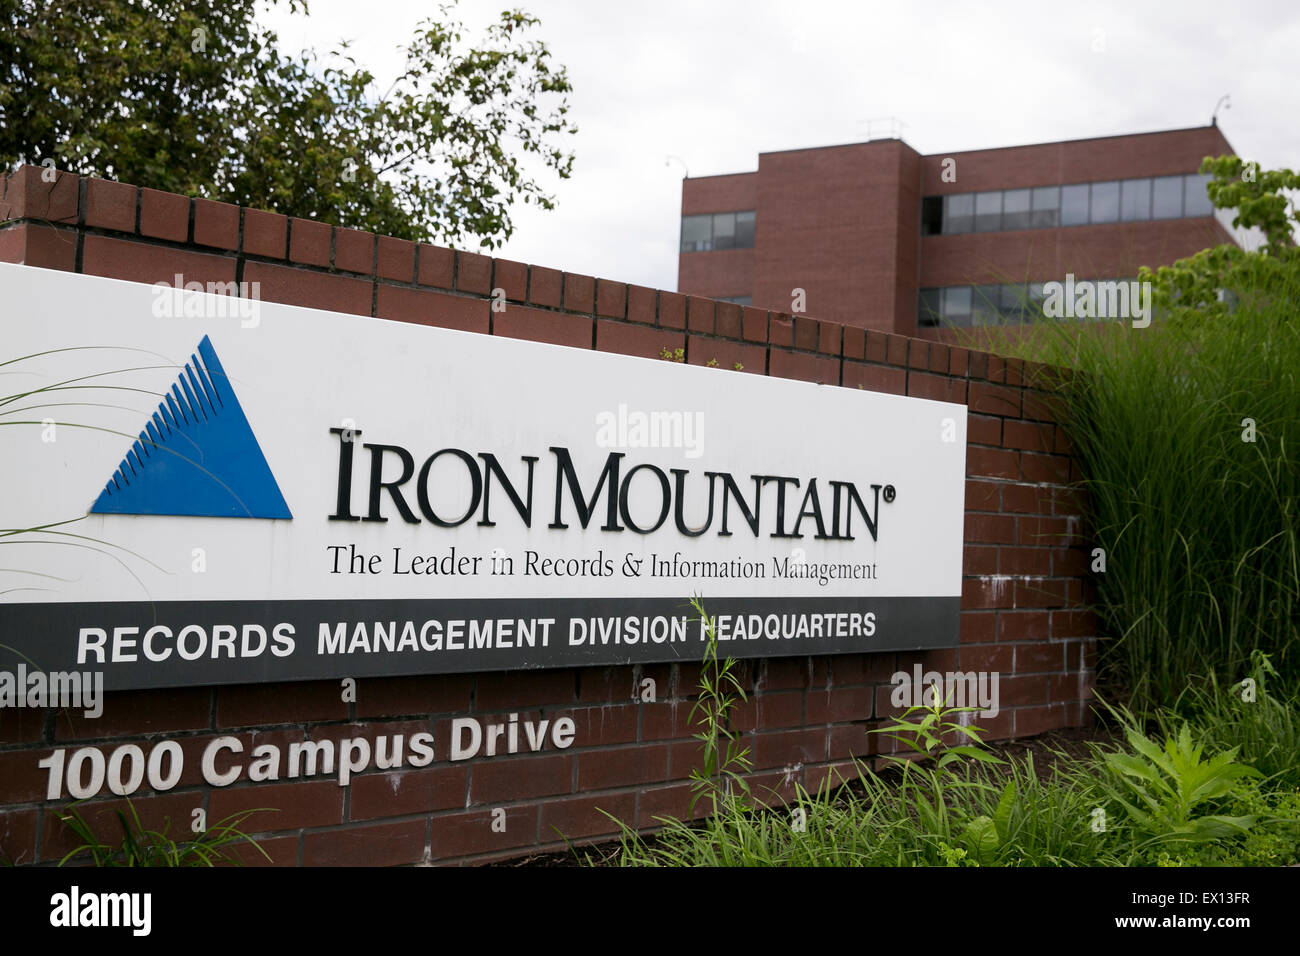 A logo sign outside the headquarters of the Iron Mountain Records Management Division in Collegeville, Pennsylvania. Stock Photo